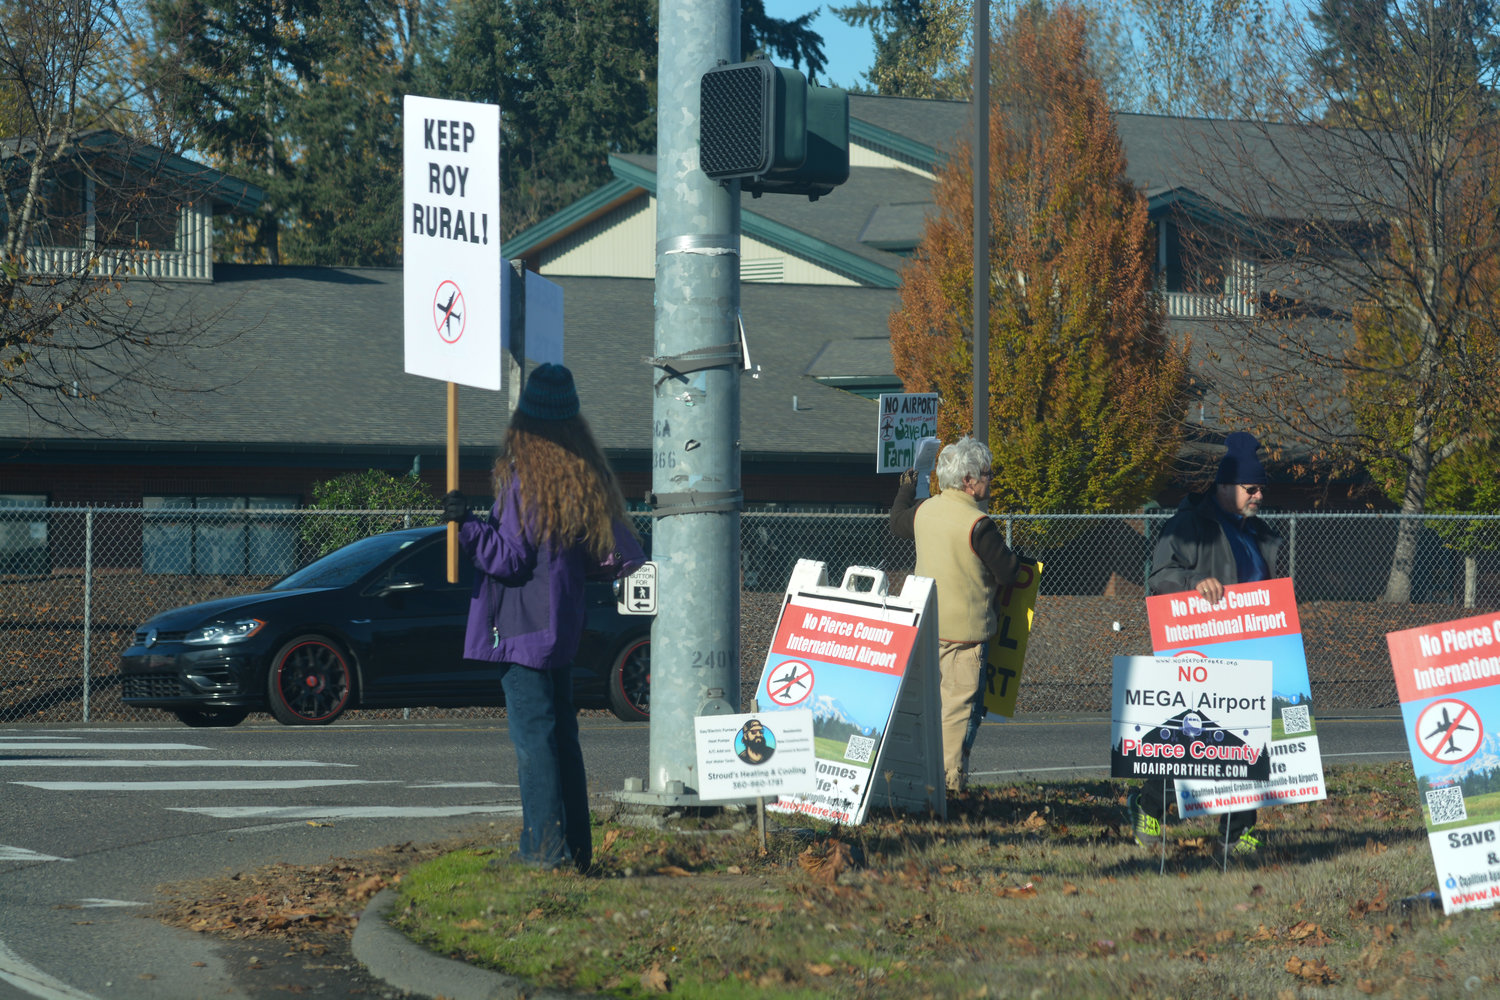 Residents against the posibility of construction of an airport in rural Thurston displayed their displeasure with the potential airport on Saturday, Nov. 12.